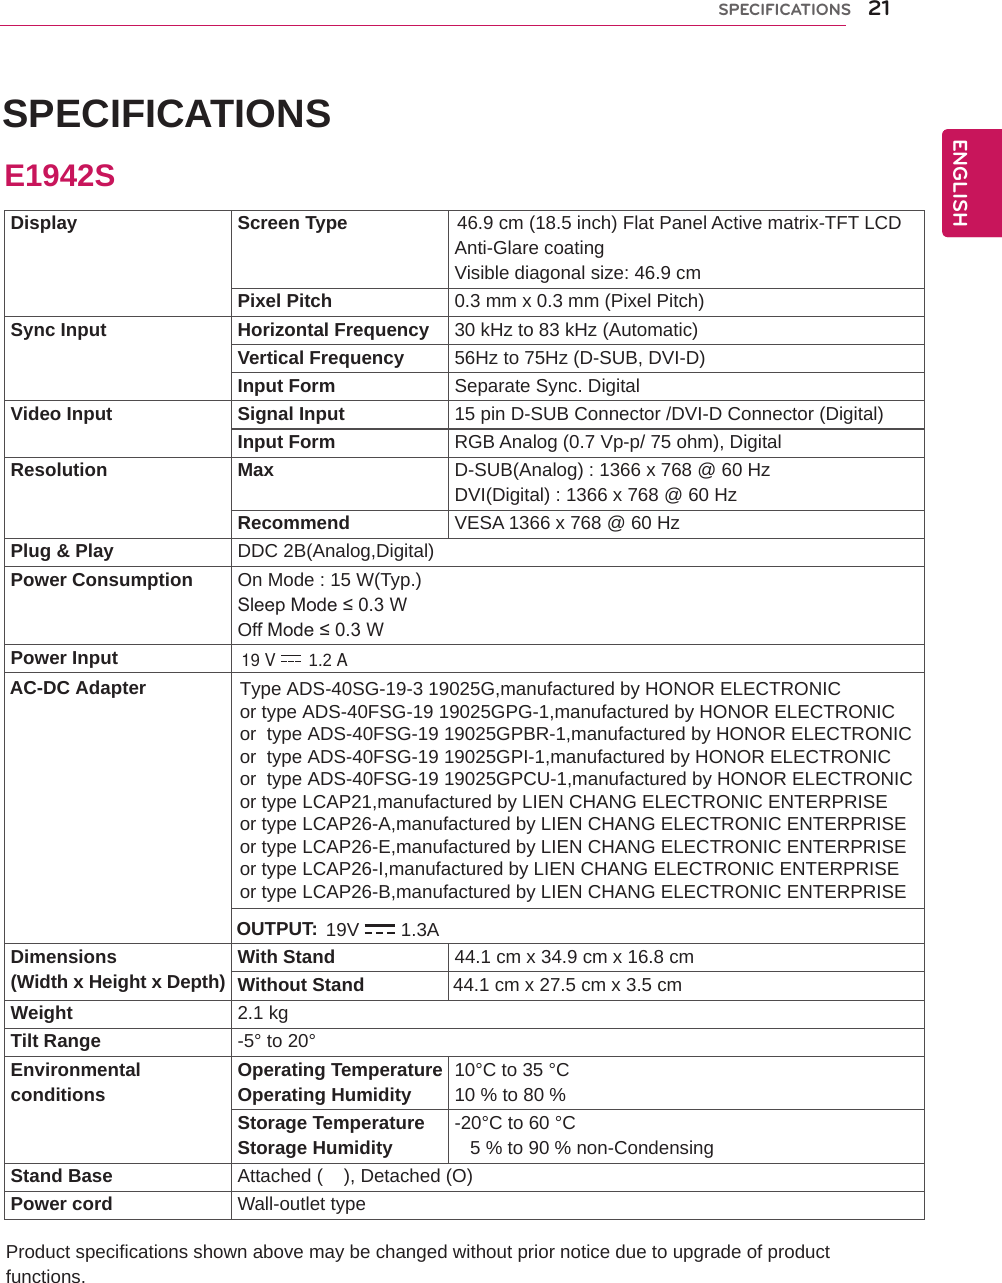 21ENGENGLISHSPECIFICATIONS SPECIFICATIONS Product specifications shown above may be changed without prior notice due to upgrade of product functions.Display Screen Type                     46.9 cm (18.5 inch) Flat Panel Active matrix-TFT LCDAnti-Glare coatingVisible diagonal size: 46.9 cmPixel Pitch 0.3 mm x 0.3 mm (Pixel Pitch)Sync Input Horizontal Frequency 30 kHz to 83 kHz (Automatic)Vertical Frequency 56Hz to 75Hz (D-SUB, DVI-D)Input Form Separate Sync. DigitalVideo Input Signal Input 15 pin D-SUB Connector /DVI-D Connector (Digital)Input Form RGB Analog (0.7 Vp-p/ 75 ohm), DigitalResolution Max D-SUB(Analog) : 1366 x 768 @ 60 HzDVI(Digital) : 1366 x 768 @ 60 HzRecommend VESA 1366 x 768 @ 60 HzPlug &amp; Play DDC 2B(Analog,Digital)Power Consumption On Mode : 15 W(Typ.)Sleep Mode ≤ 0.3 W Off Mode ≤ 0.3 W Power InputDimensions(Width x Height x Depth) With Stand 44.1 cm x 34.9 cm x 16.8 cmWithout Stand                 44.1 cm x 27.5 cm x 3.5 cmWeight 2.1 kgTilt Range -5° to 20°Environmentalconditions Operating TemperatureOperating Humidity 10°C to 35 °C10 % to 80 % Storage TemperatureStorage Humidity -20°C to 60 °C   5 % to 90 % non-CondensingStand Base Attached (    ), Detached (O)Power cord Wall-outlet typeE1942S19 V 1.2 A AC-DC Adapter Type ADS-40SG-19-3 19025G,manufactured by HONOR ELECTRONICor type ADS-40FSG-19 19025GPG-1,manufactured by HONOR ELECTRONICor  type ADS-40FSG-19 19025GPBR-1,manufactured by HONOR ELECTRONICor  type ADS-40FSG-19 19025GPI-1,manufactured by HONOR ELECTRONICor  type ADS-40FSG-19 19025GPCU-1,manufactured by HONOR ELECTRONICor type LCAP21,manufactured by LIEN CHANG ELECTRONIC ENTERPRISEor type LCAP26-A,manufactured by LIEN CHANG ELECTRONIC ENTERPRISEor type LCAP26-E,manufactured by LIEN CHANG ELECTRONIC ENTERPRISEor type LCAP26-I,manufactured by LIEN CHANG ELECTRONIC ENTERPRISEor type LCAP26-B,manufactured by LIEN CHANG ELECTRONIC ENTERPRISE OUTPUT: 19V 1.3A